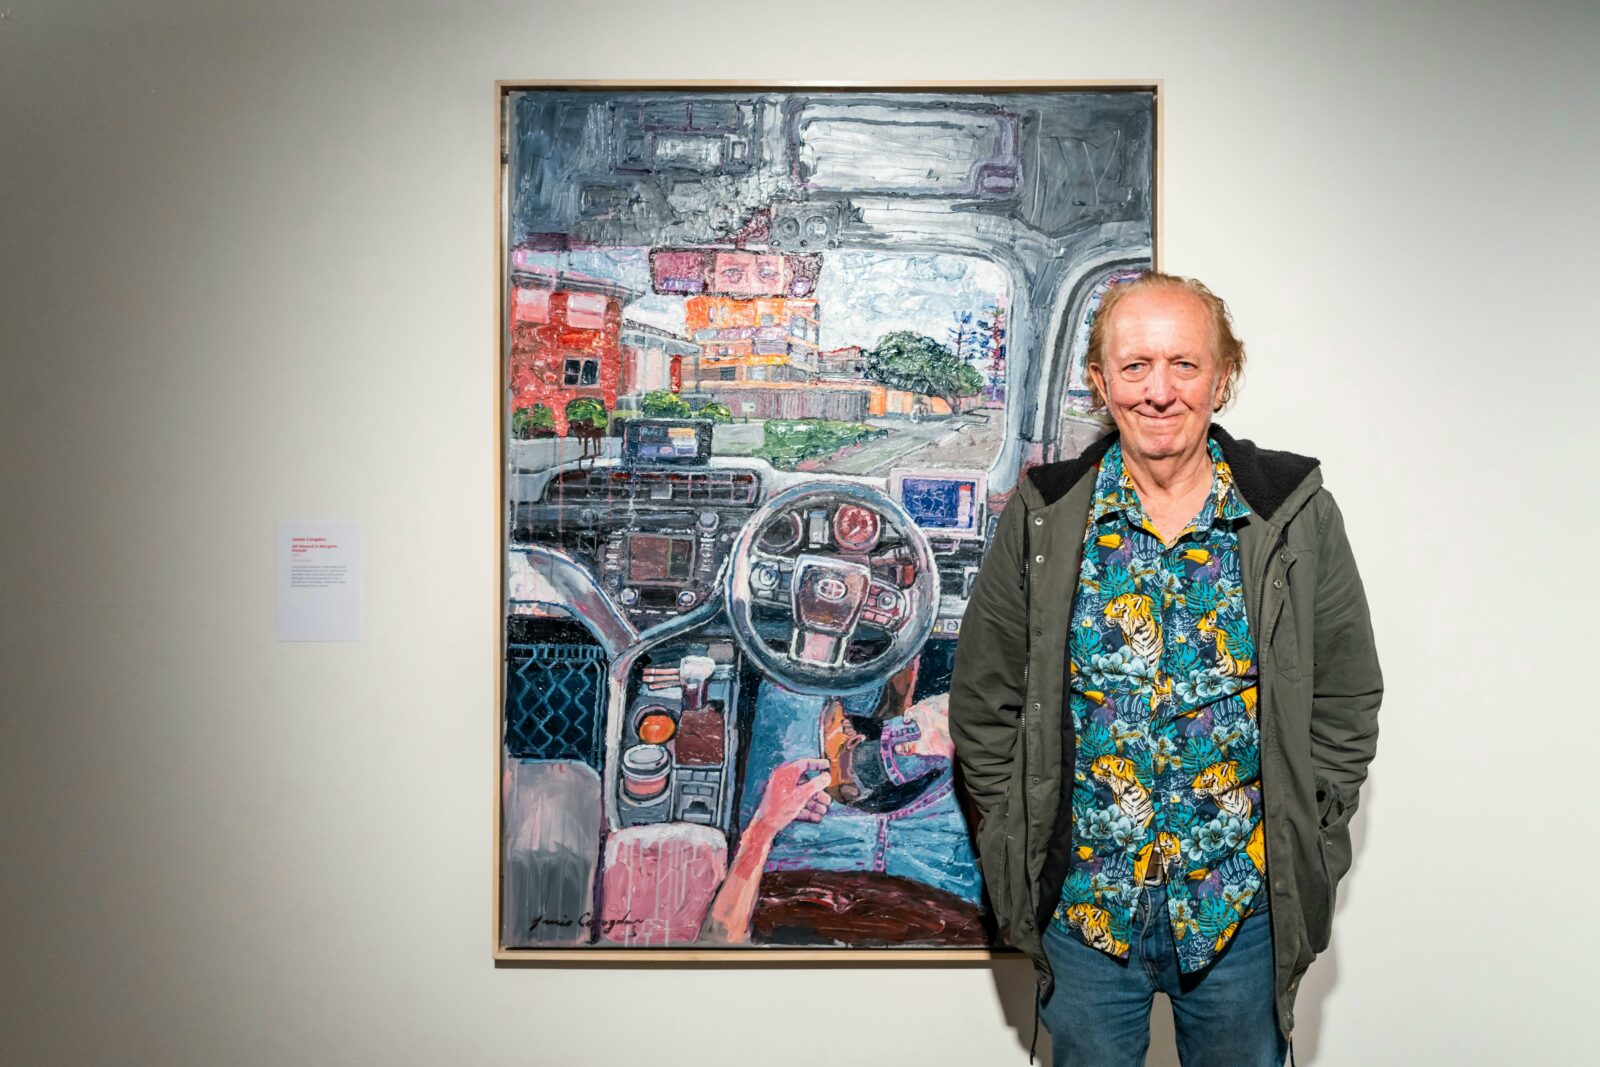 A middle-aged man standing in front of a large painting.